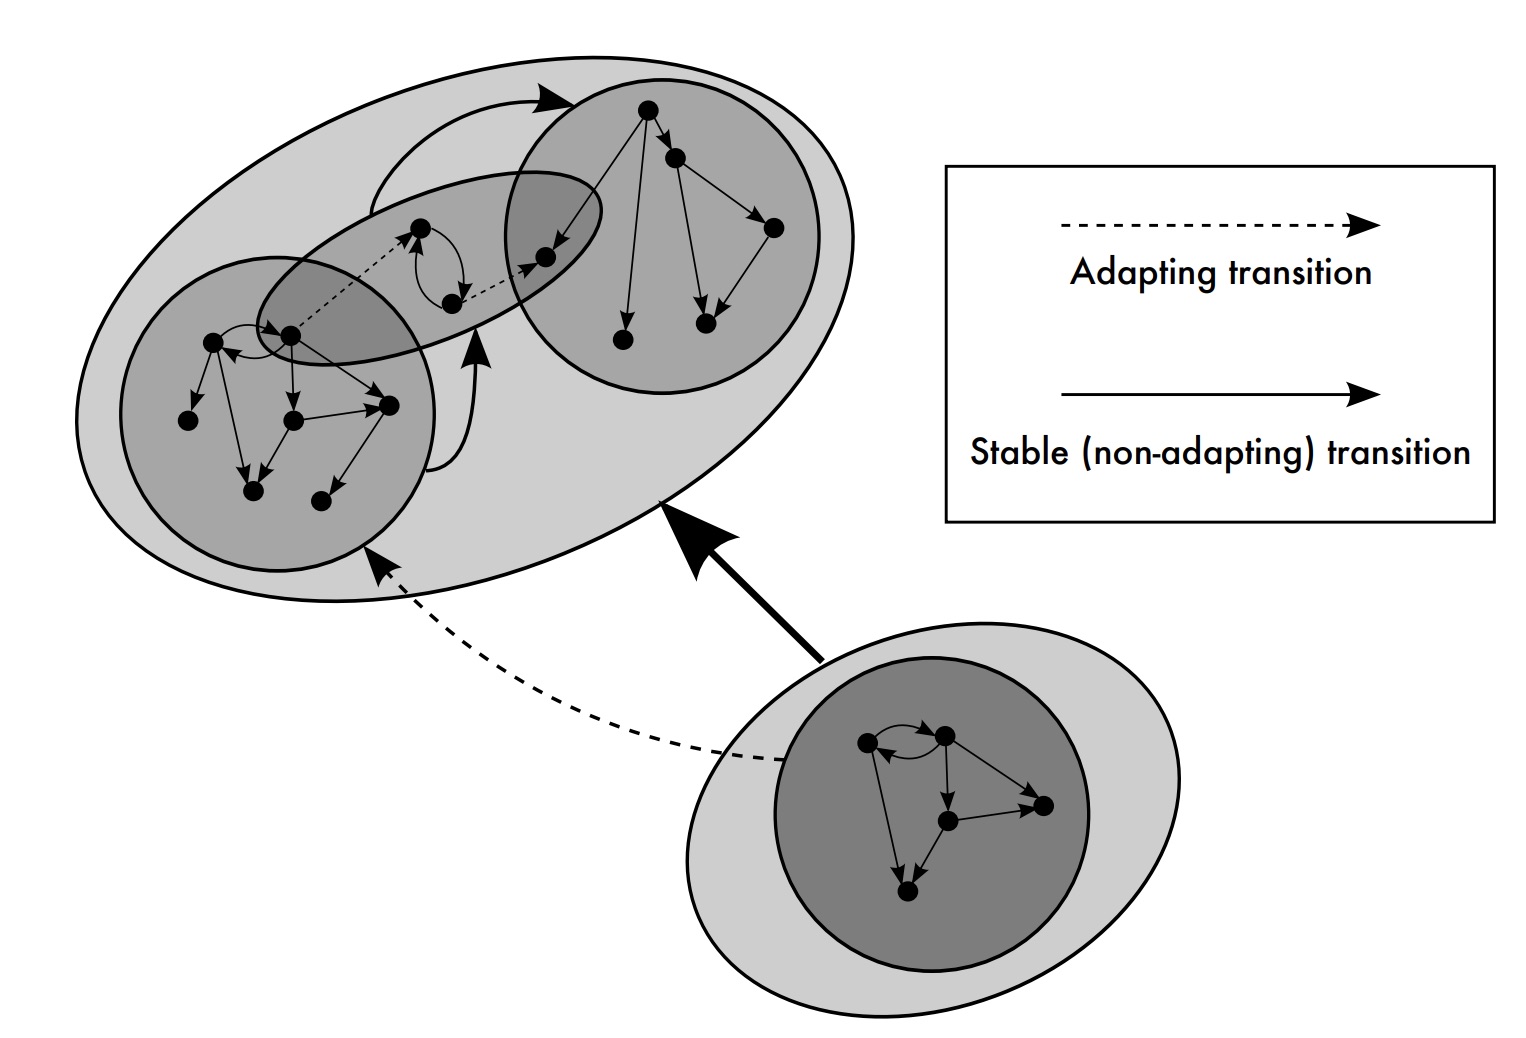 A multi-level model for self-adaptive systems